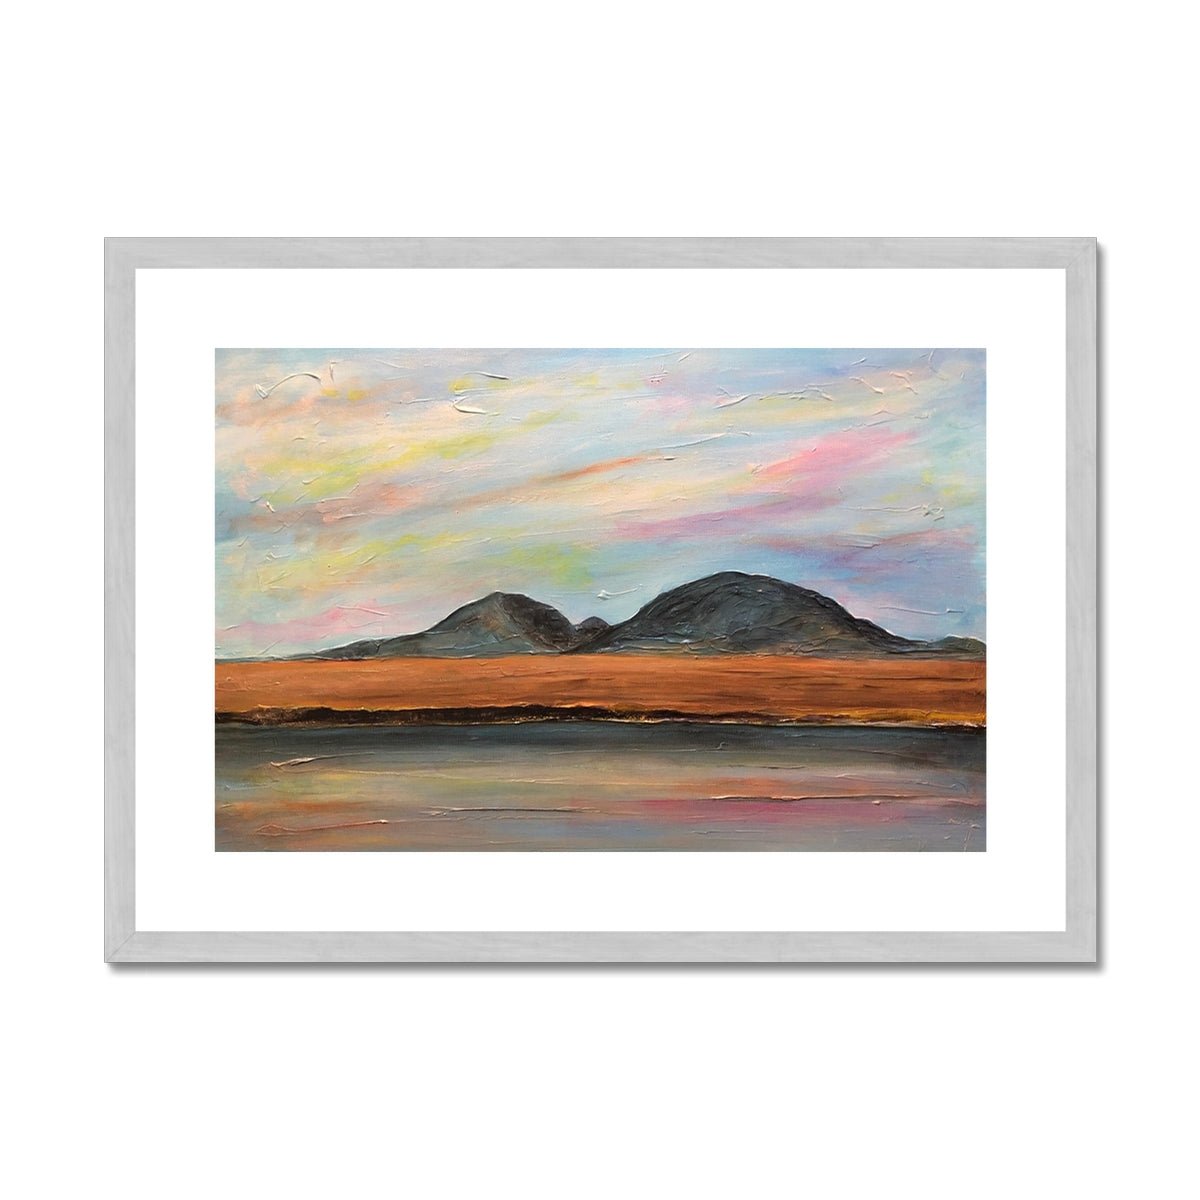 Jura Dawn Painting | Antique Framed & Mounted Prints From Scotland-Antique Framed & Mounted Prints-Hebridean Islands Art Gallery-A2 Landscape-Silver Frame-Paintings, Prints, Homeware, Art Gifts From Scotland By Scottish Artist Kevin Hunter